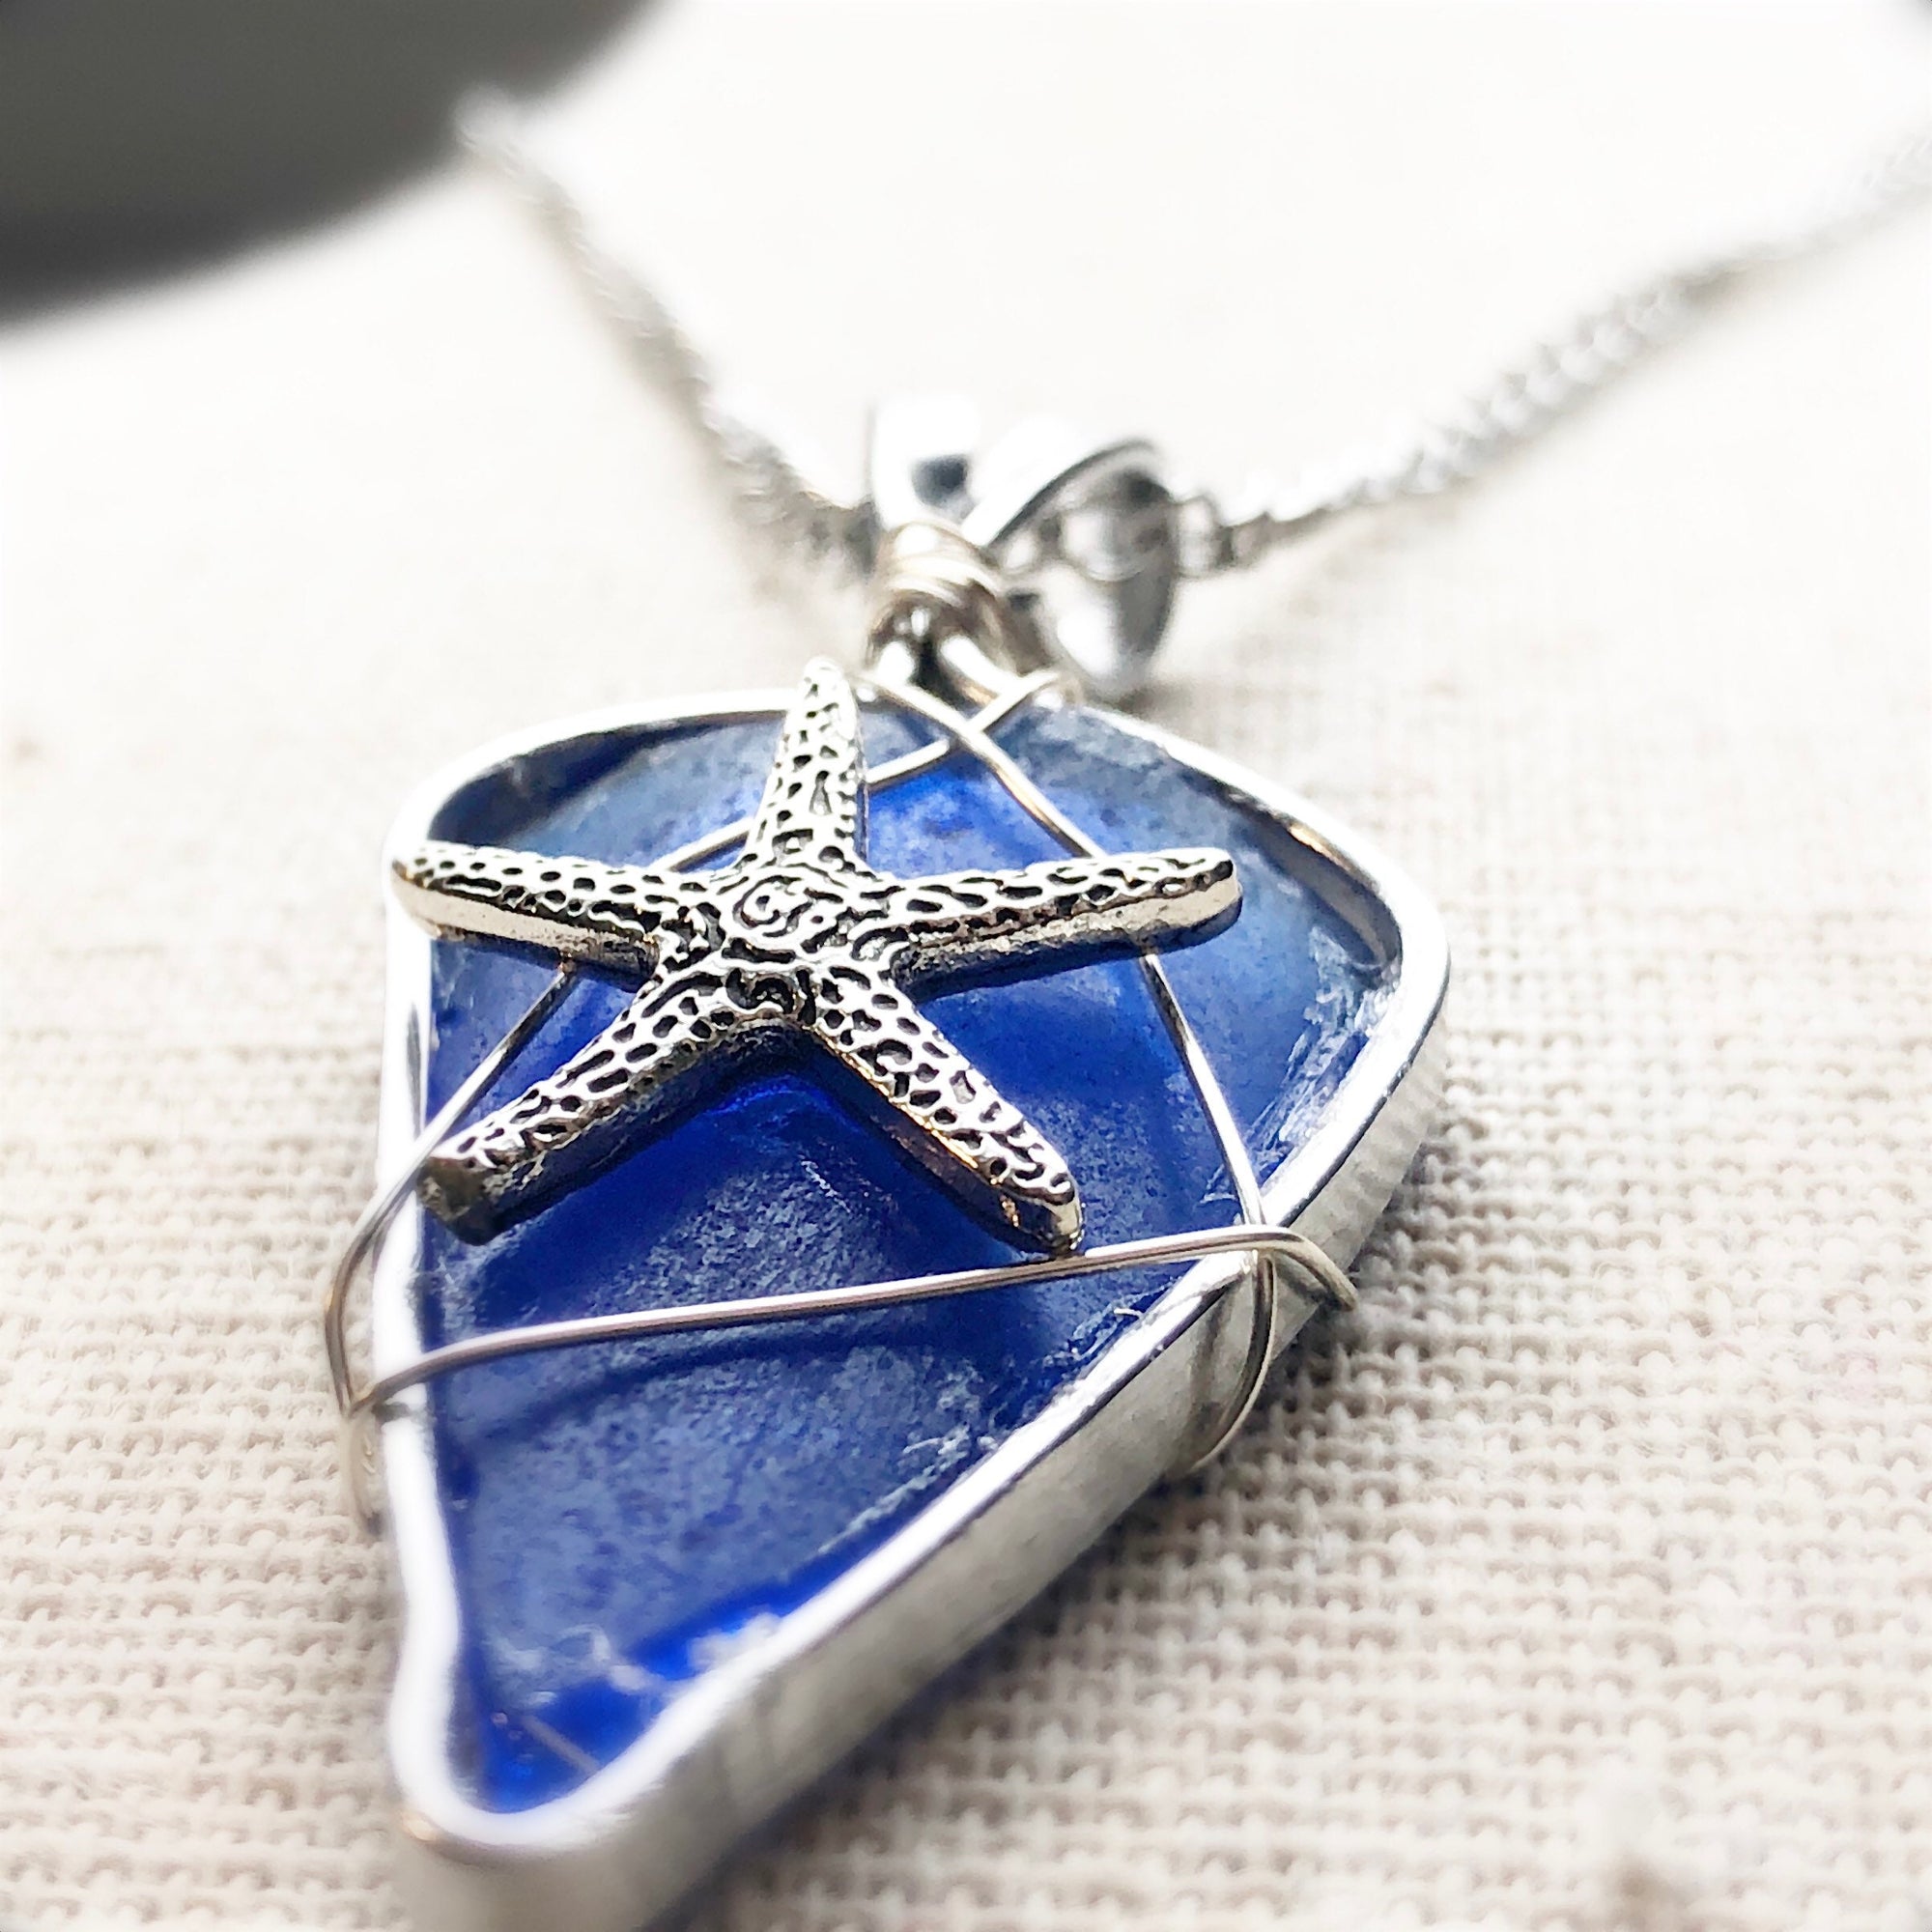 Ocean Dreams blue sea glass and starfish necklace pendant jewelry